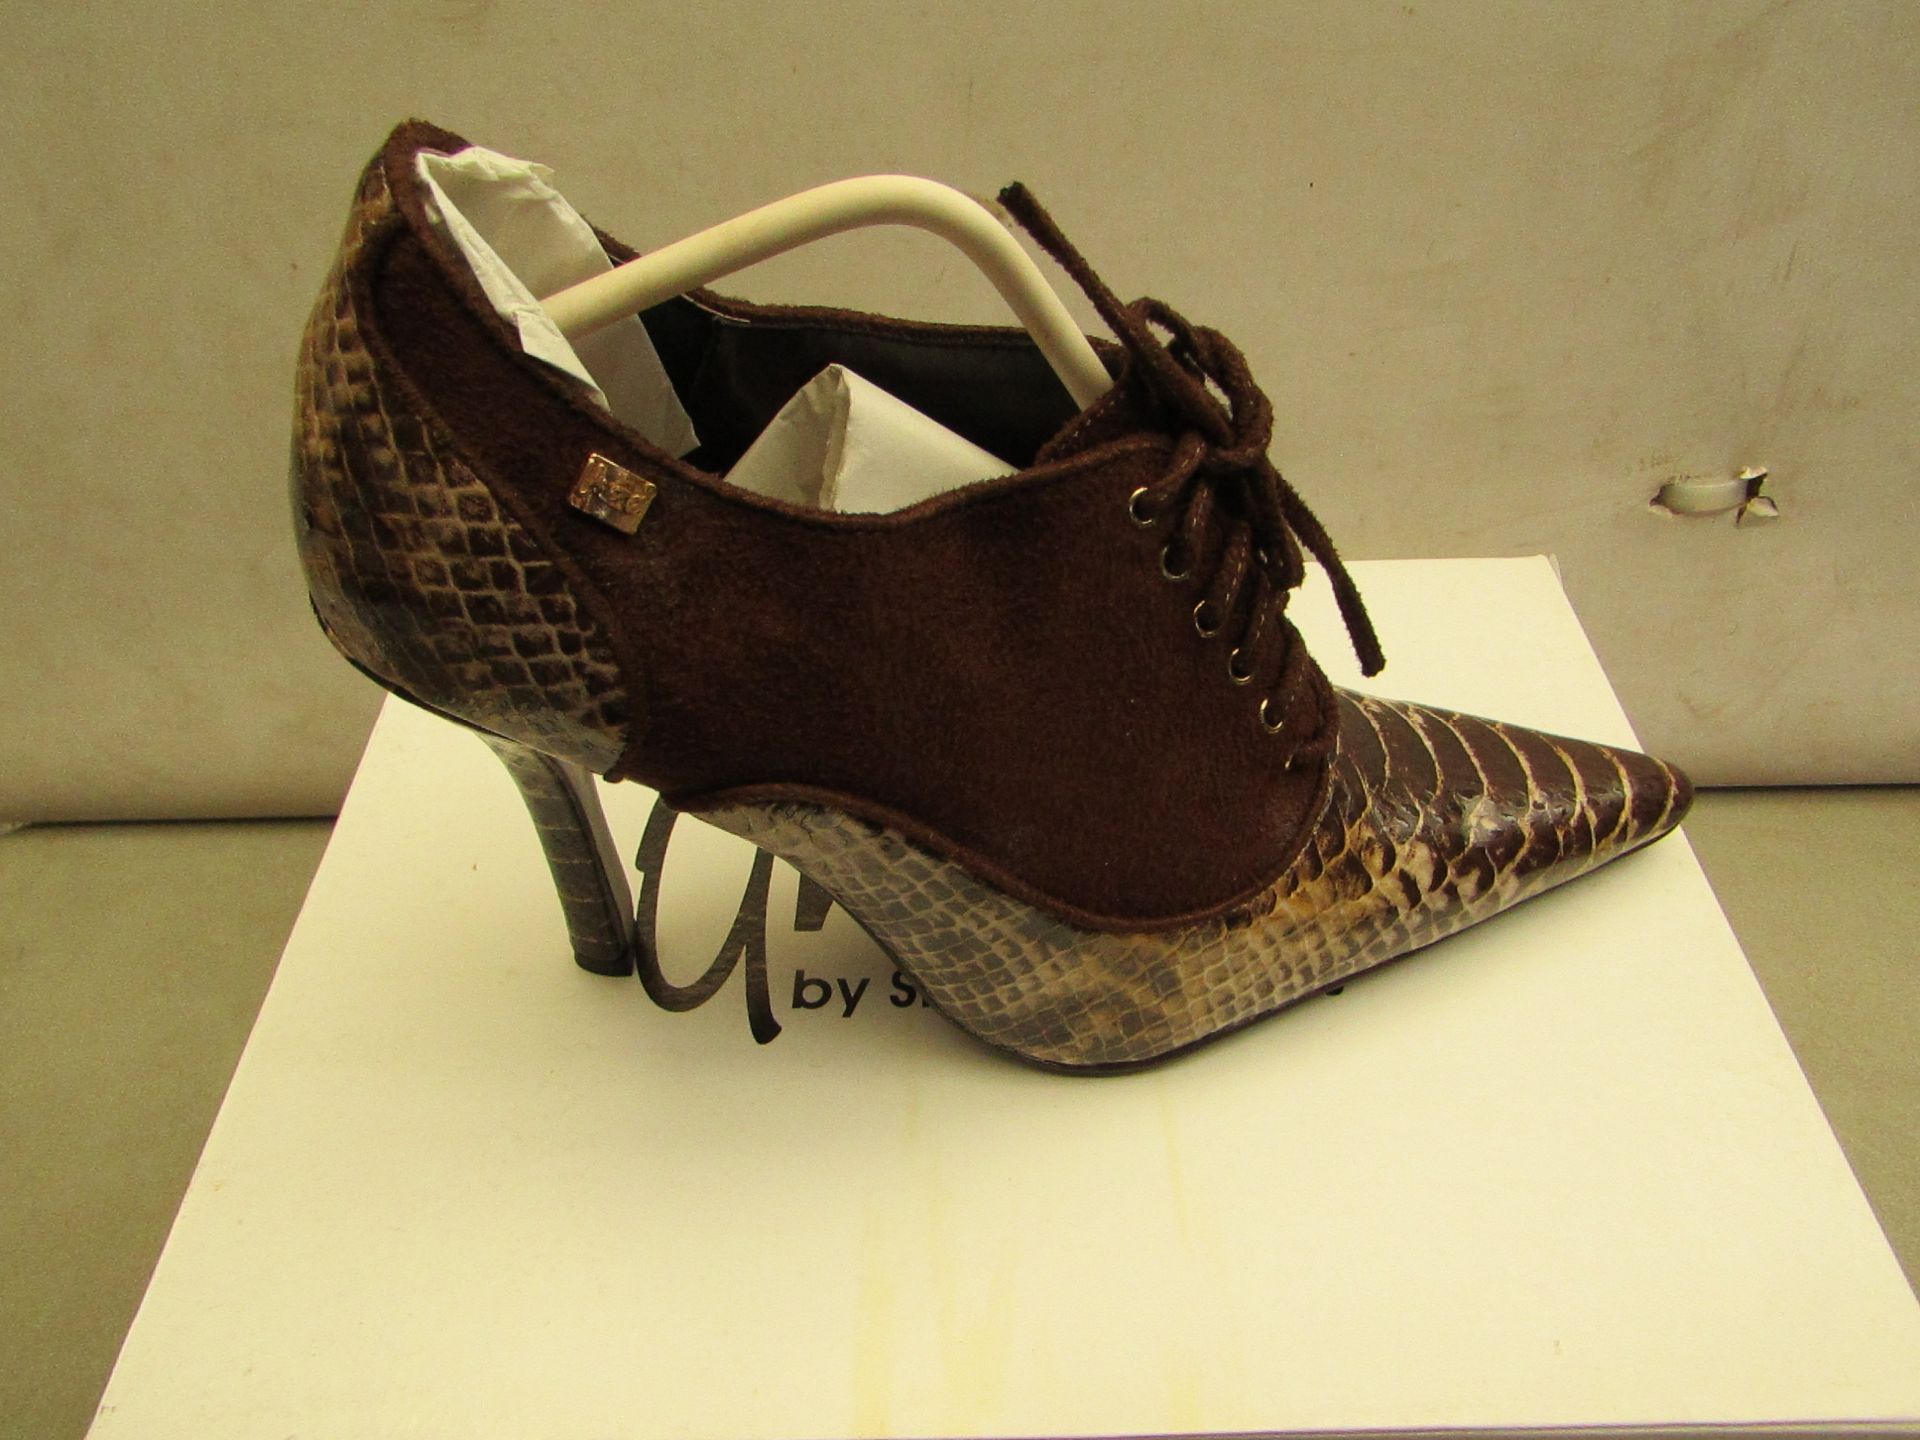 Uaze by Shalamar Shoes Ladies Brown Shoes size 8 new & boxed see image for design